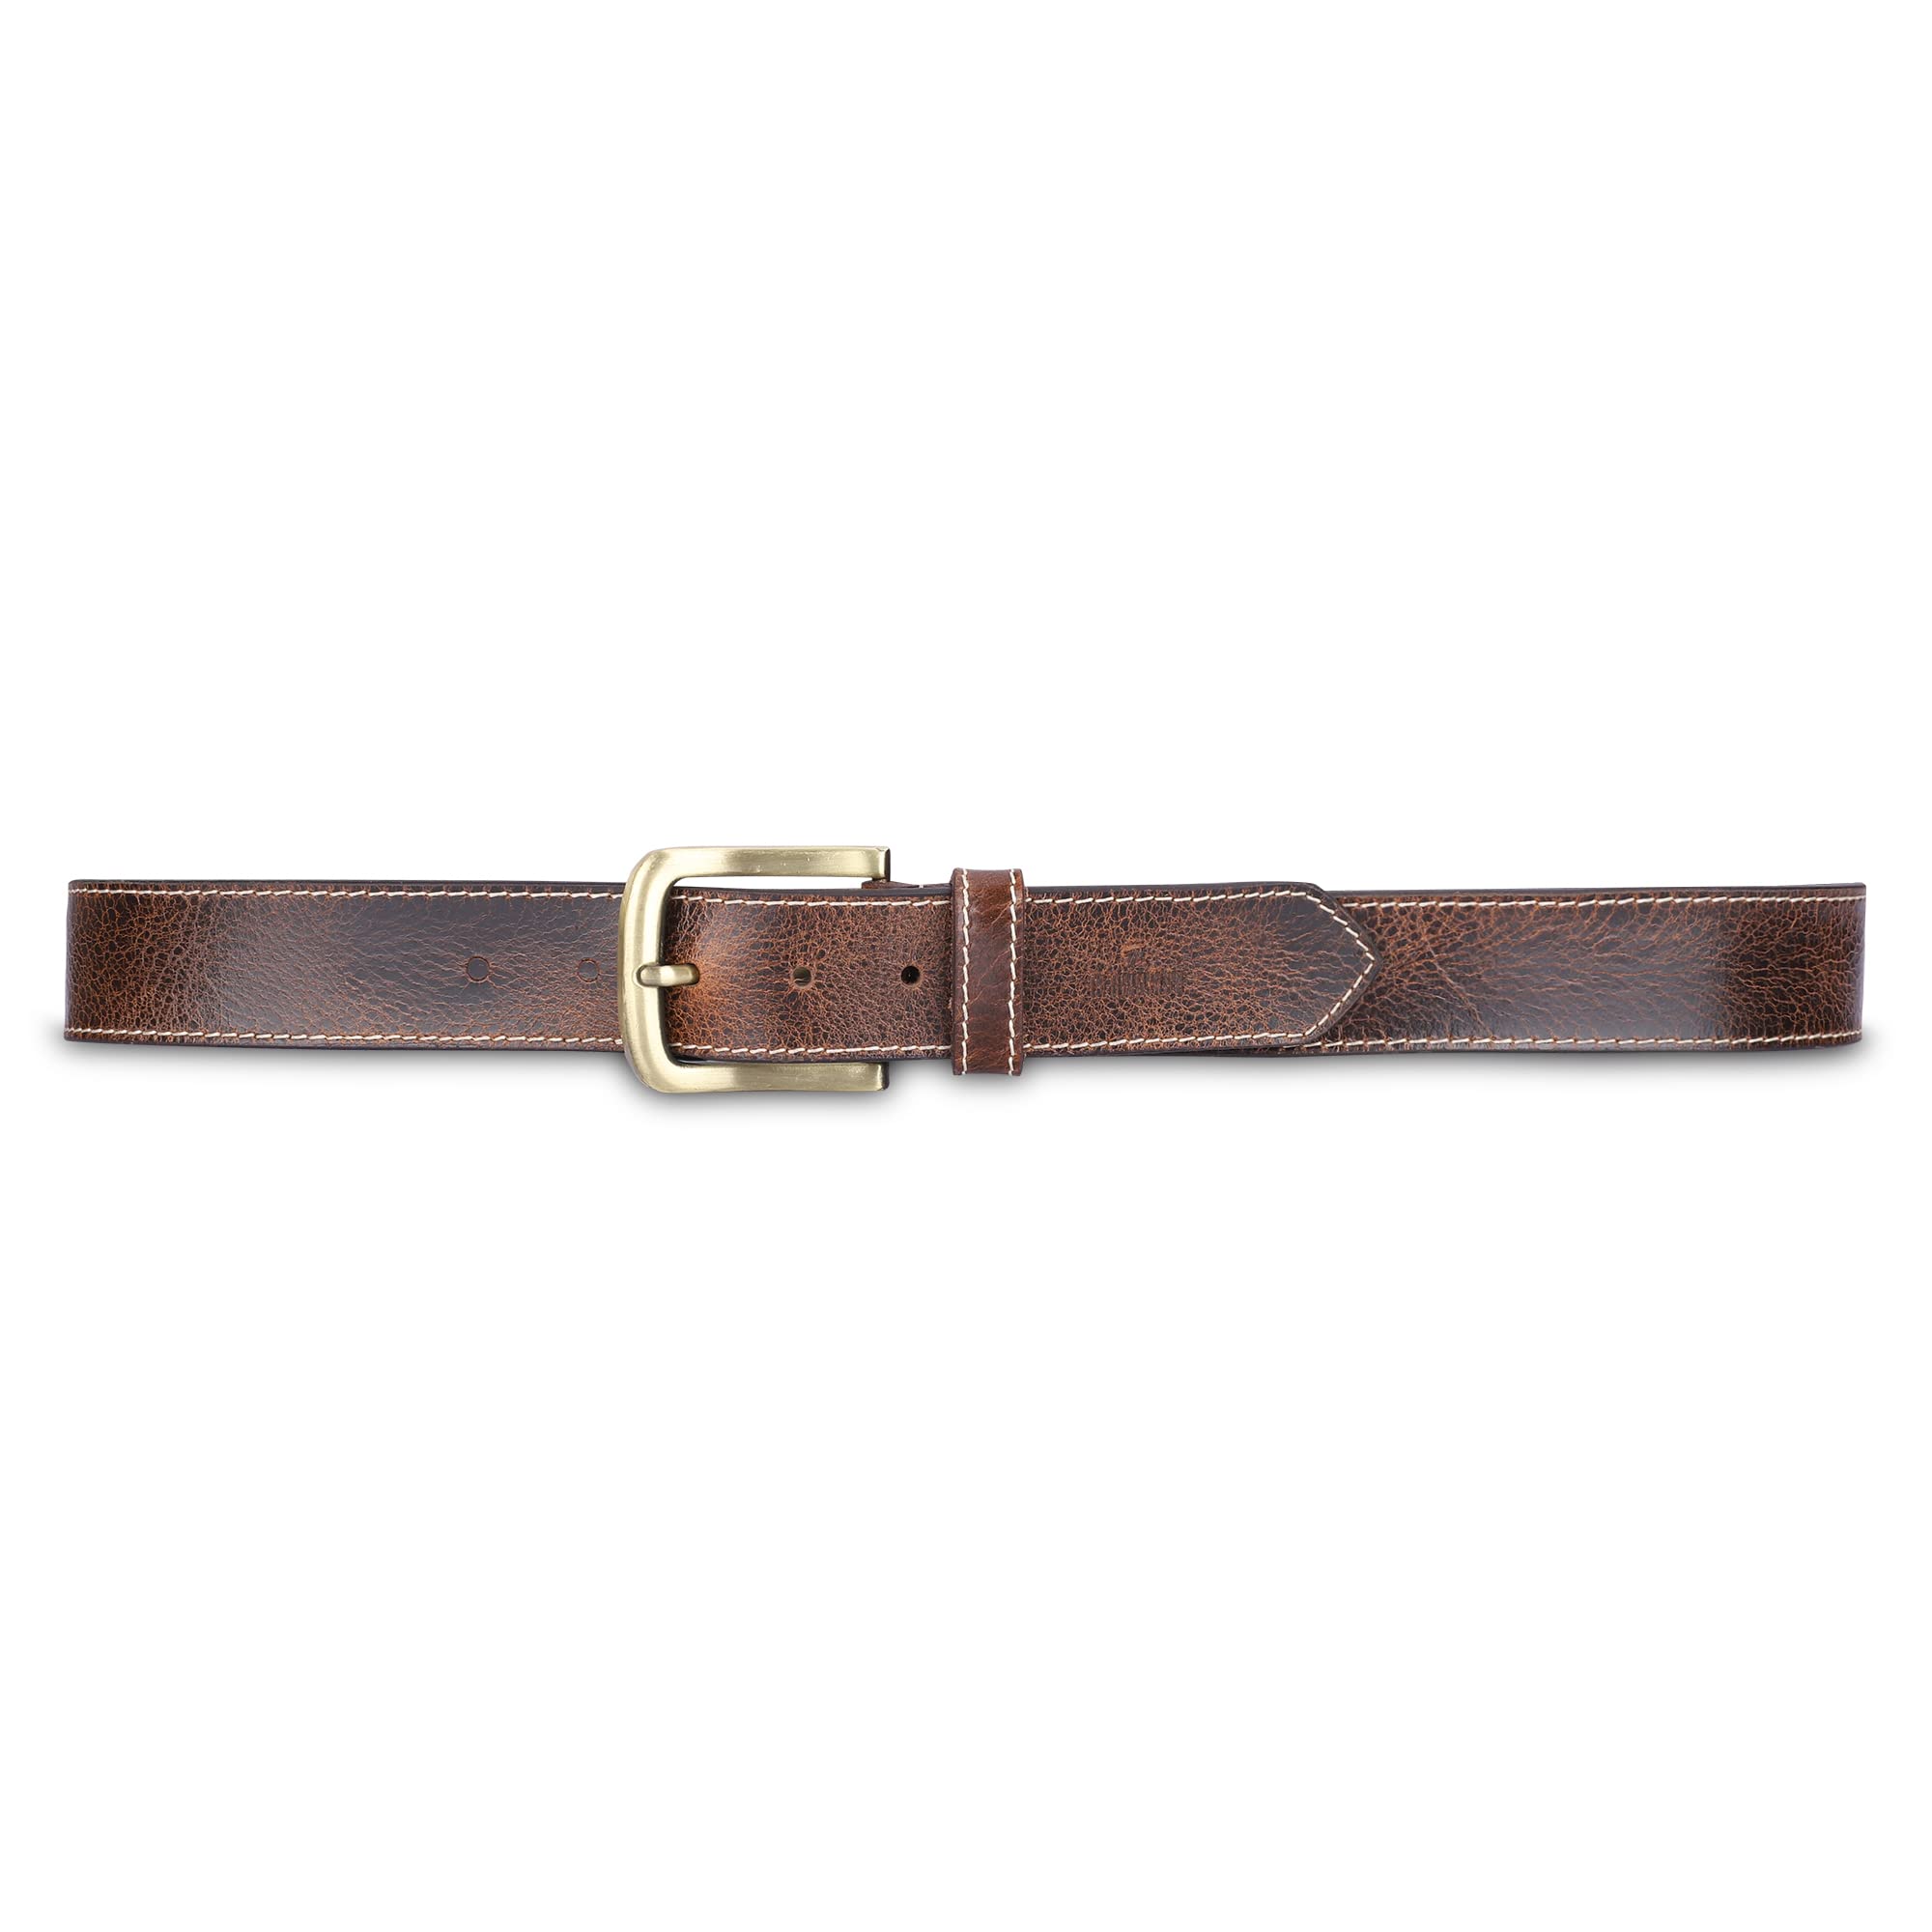 THE CLOWNFISH Men's Genuine Leather Belts - Brown (Size-36 inches)